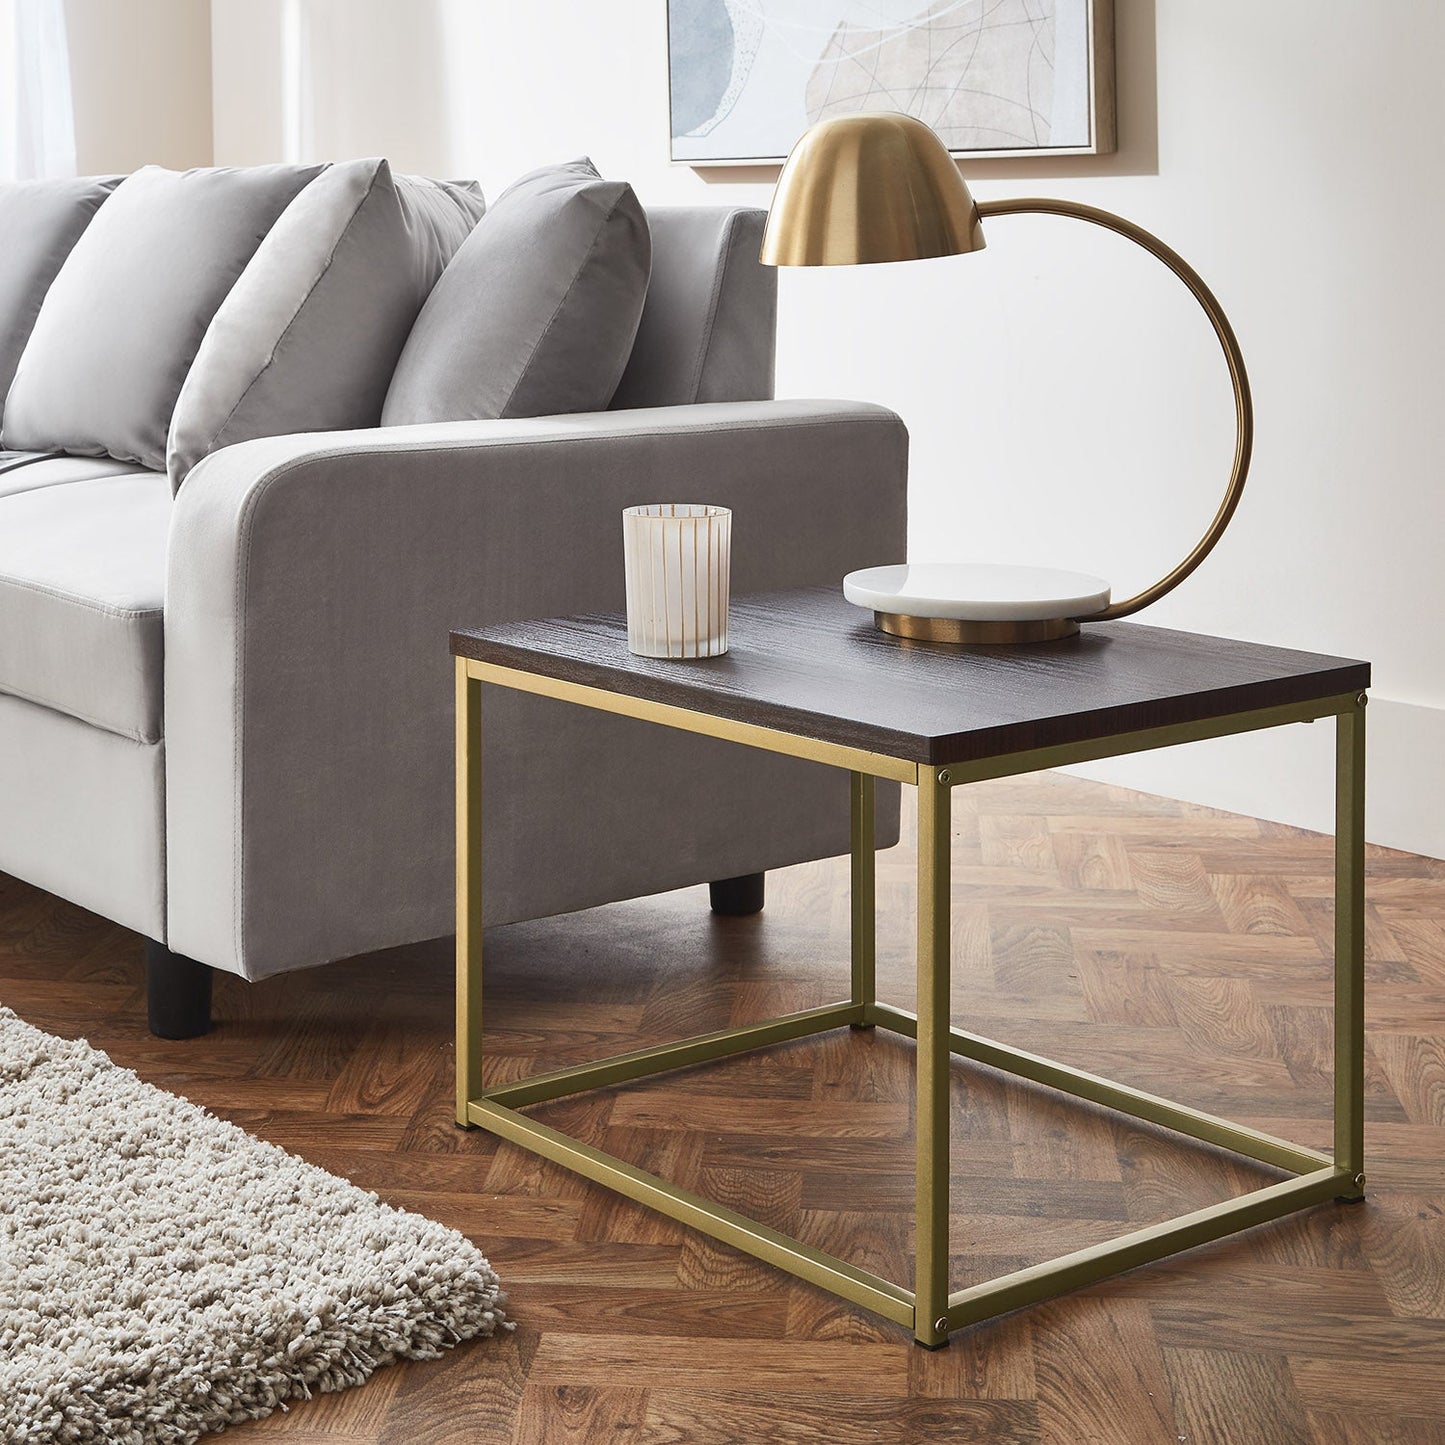 Jay coffee table and side table set - walnut effect and gold - Laura James